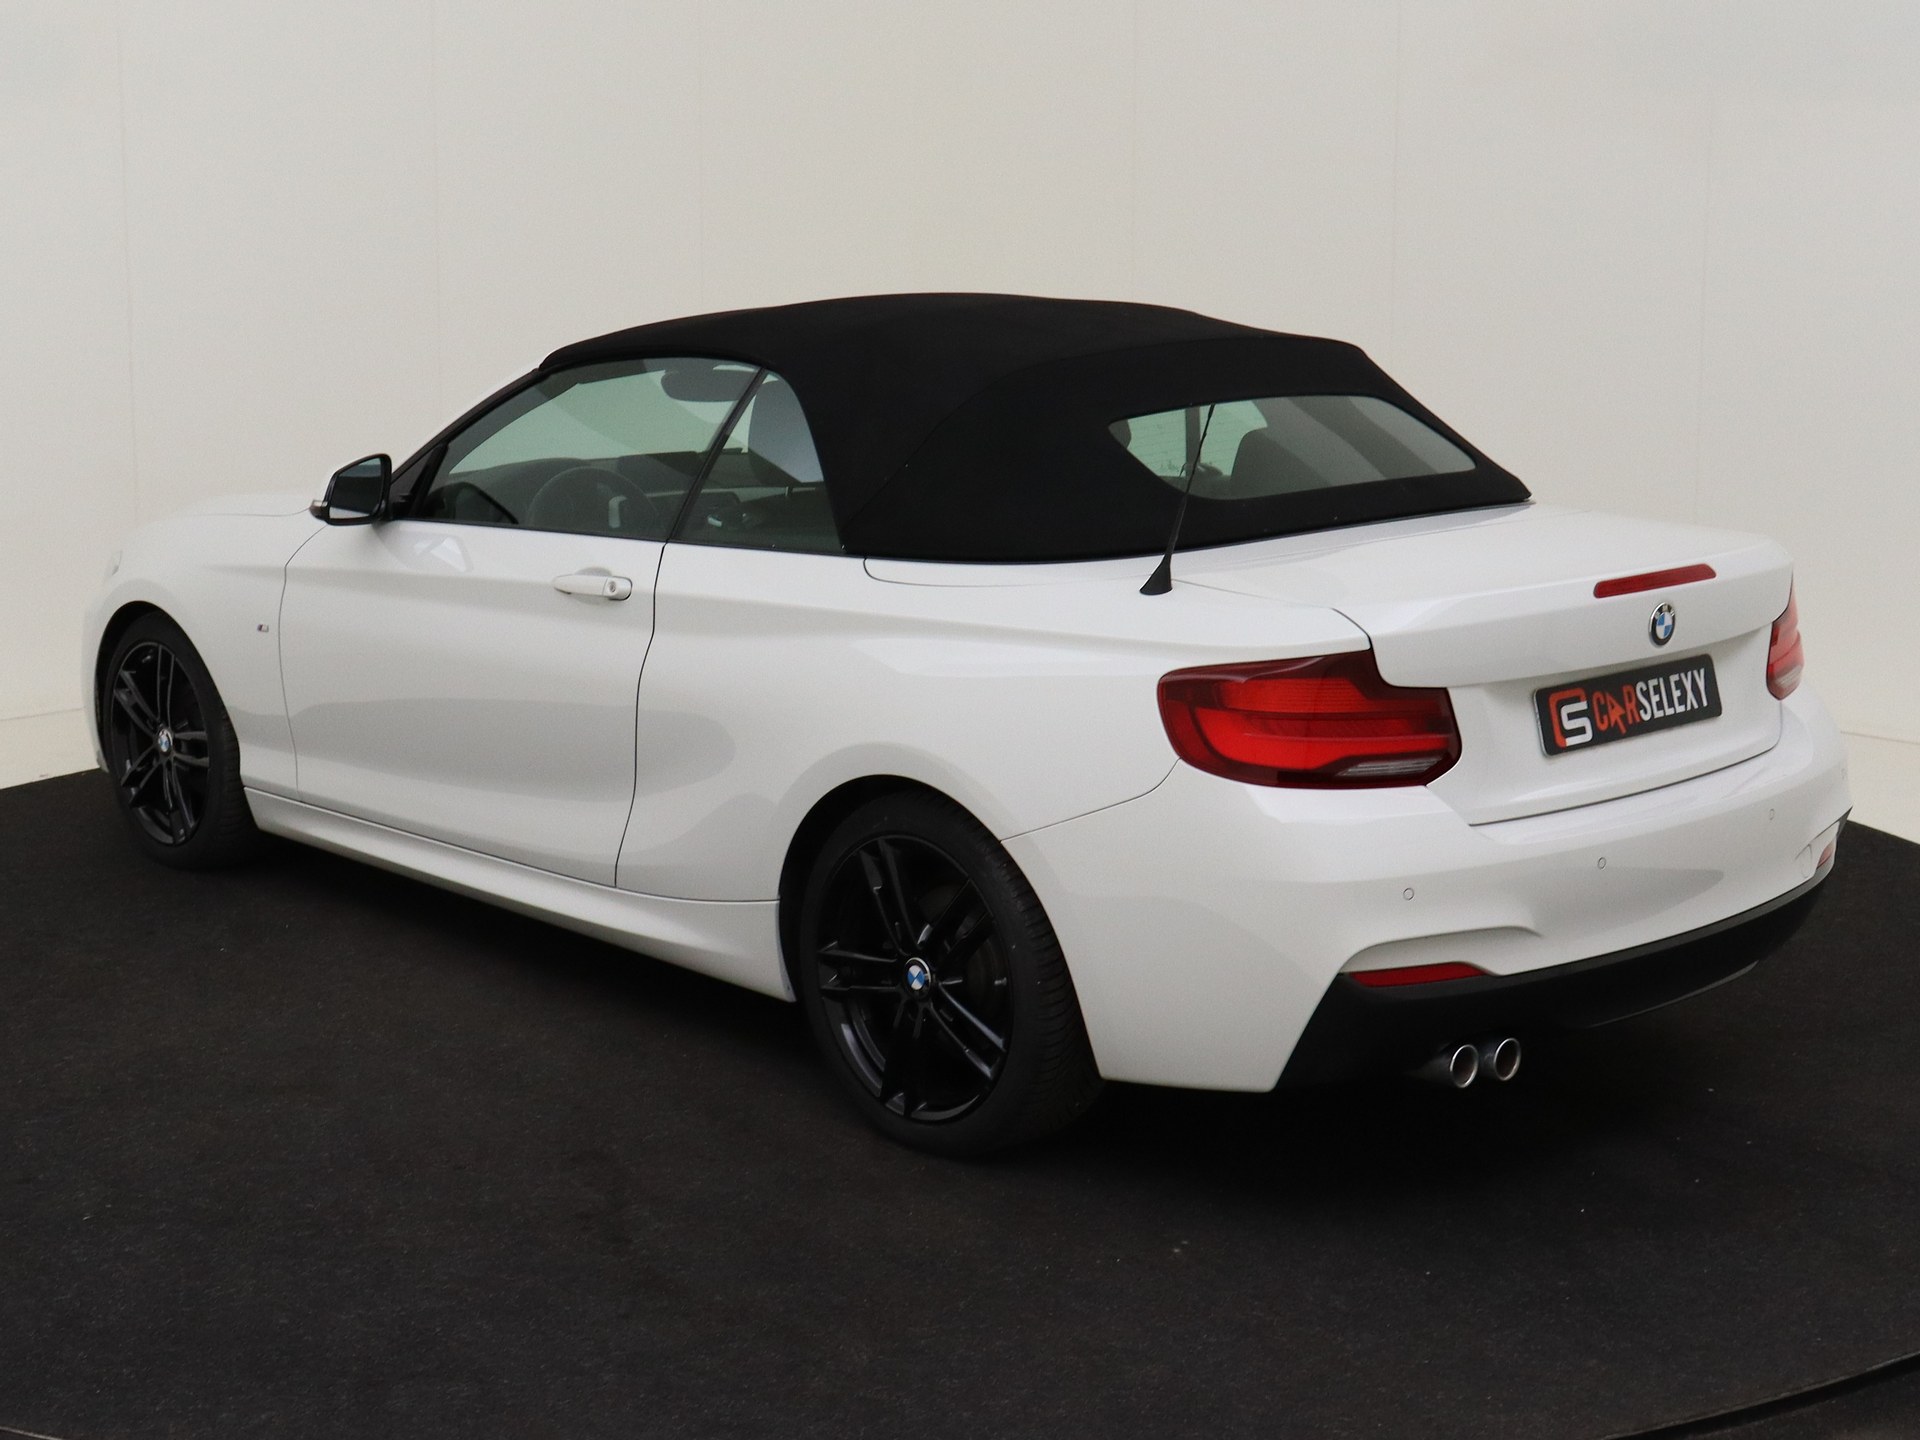 BMW 2 Serie Cabrio 218i High Executive van CarSelexy dealer RG Ulvenhout B.V. in Ulvenhout